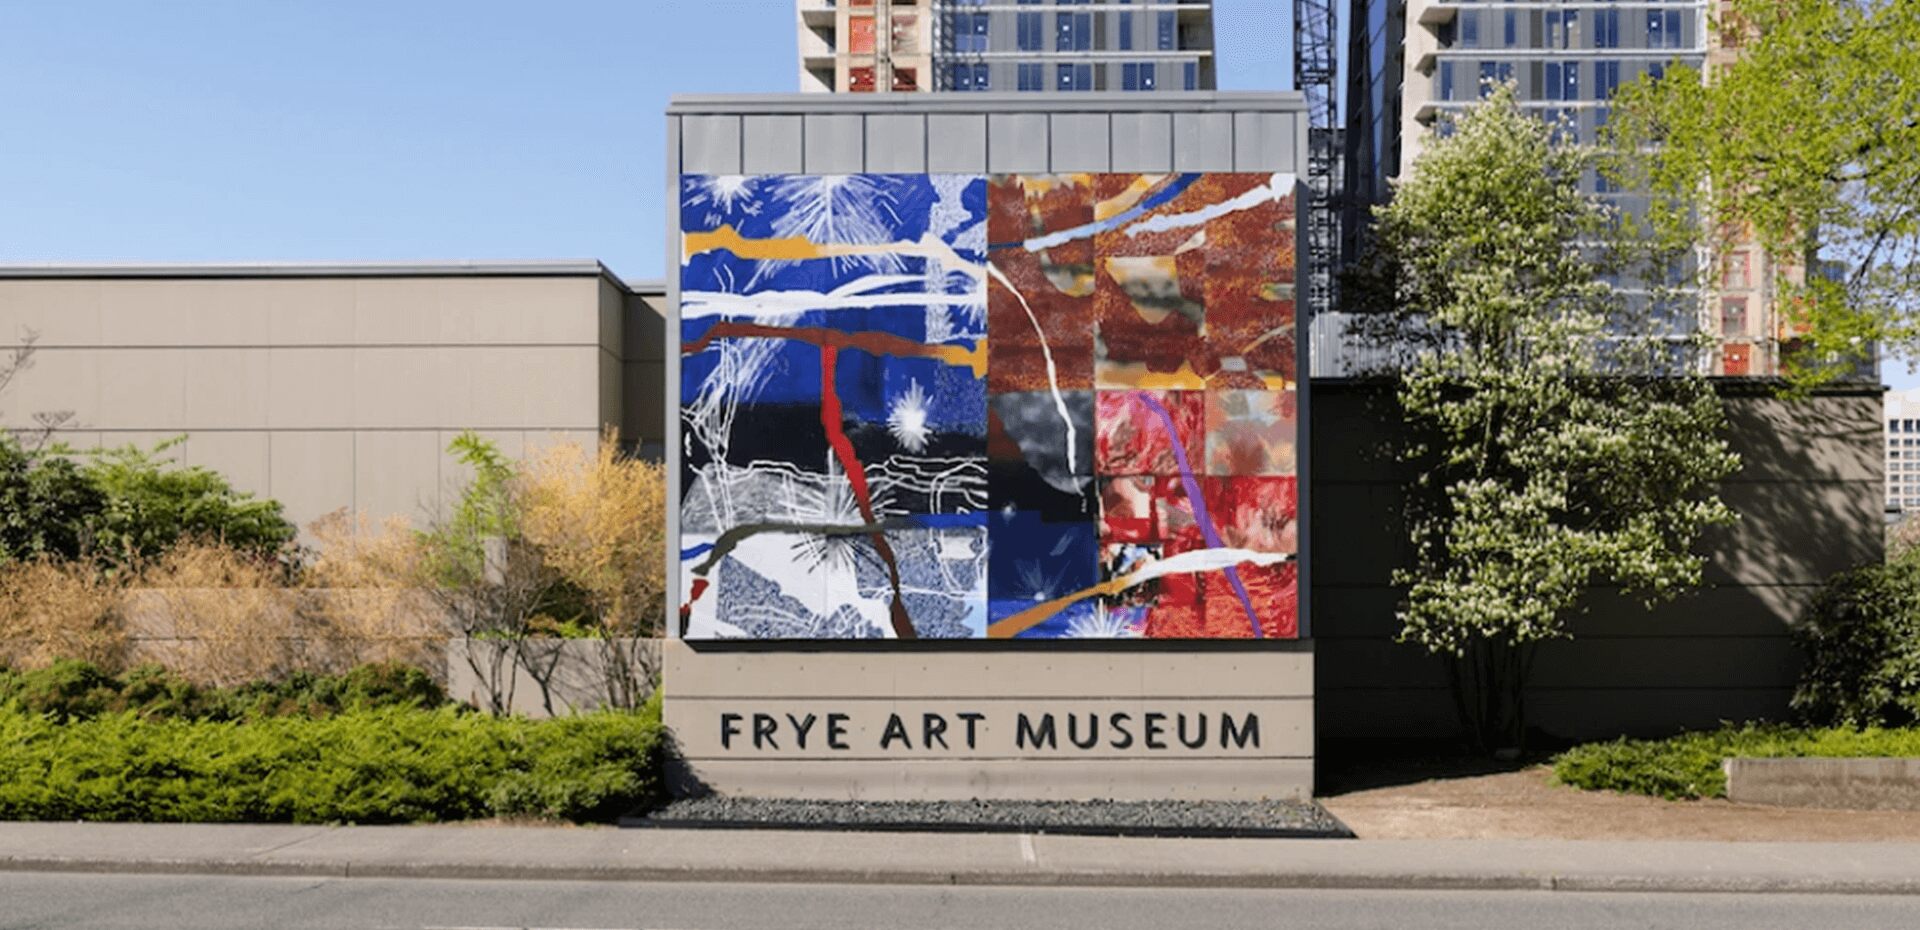 the outside of the frye art museum